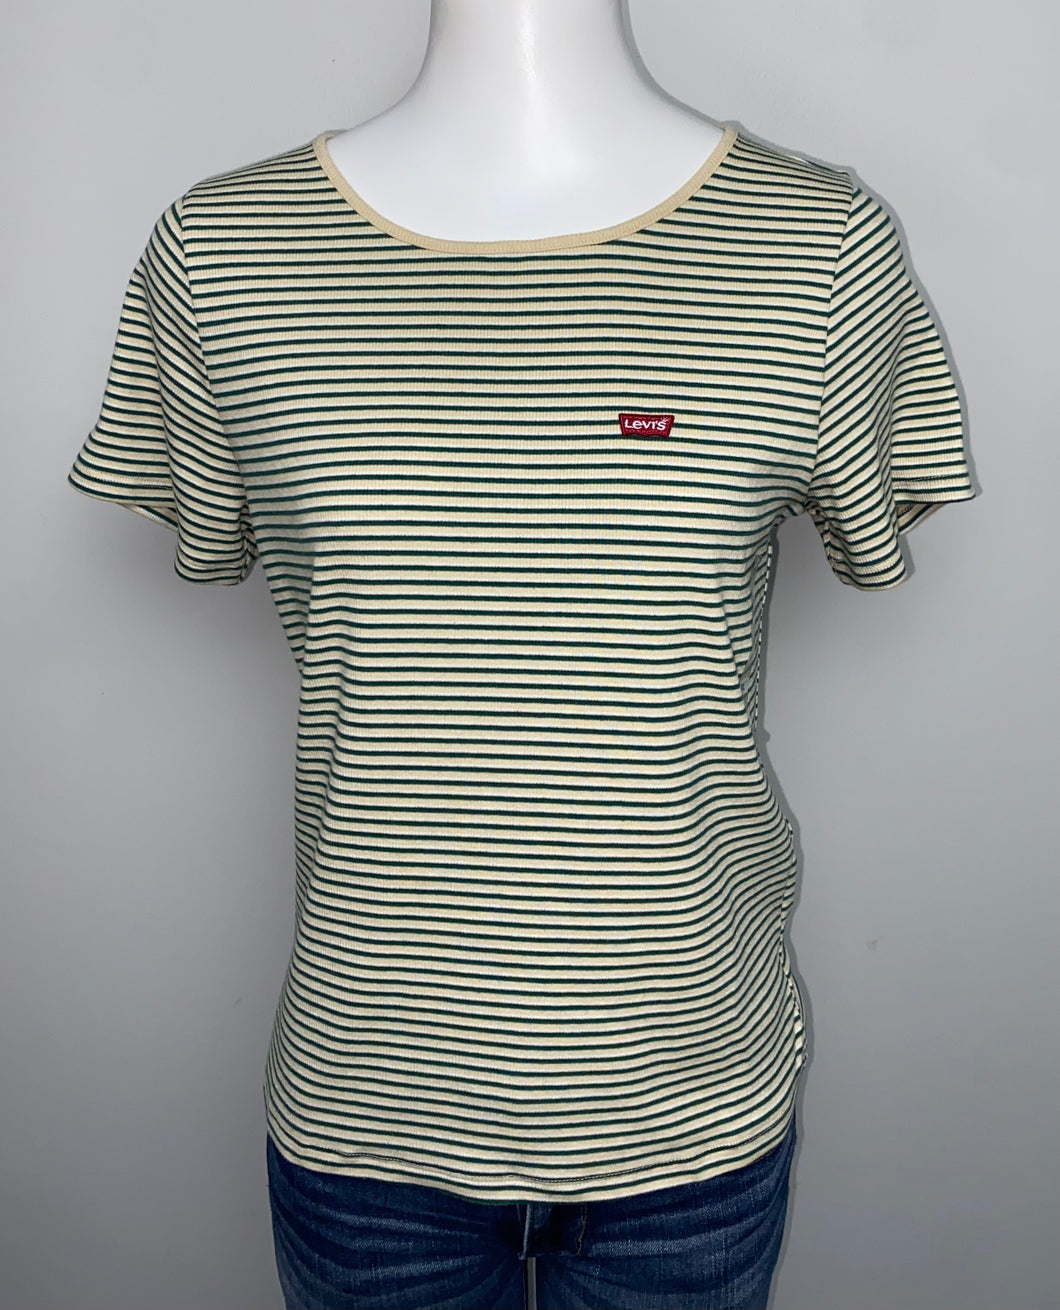 Levis Ribbed Tee NEW!- (XL)